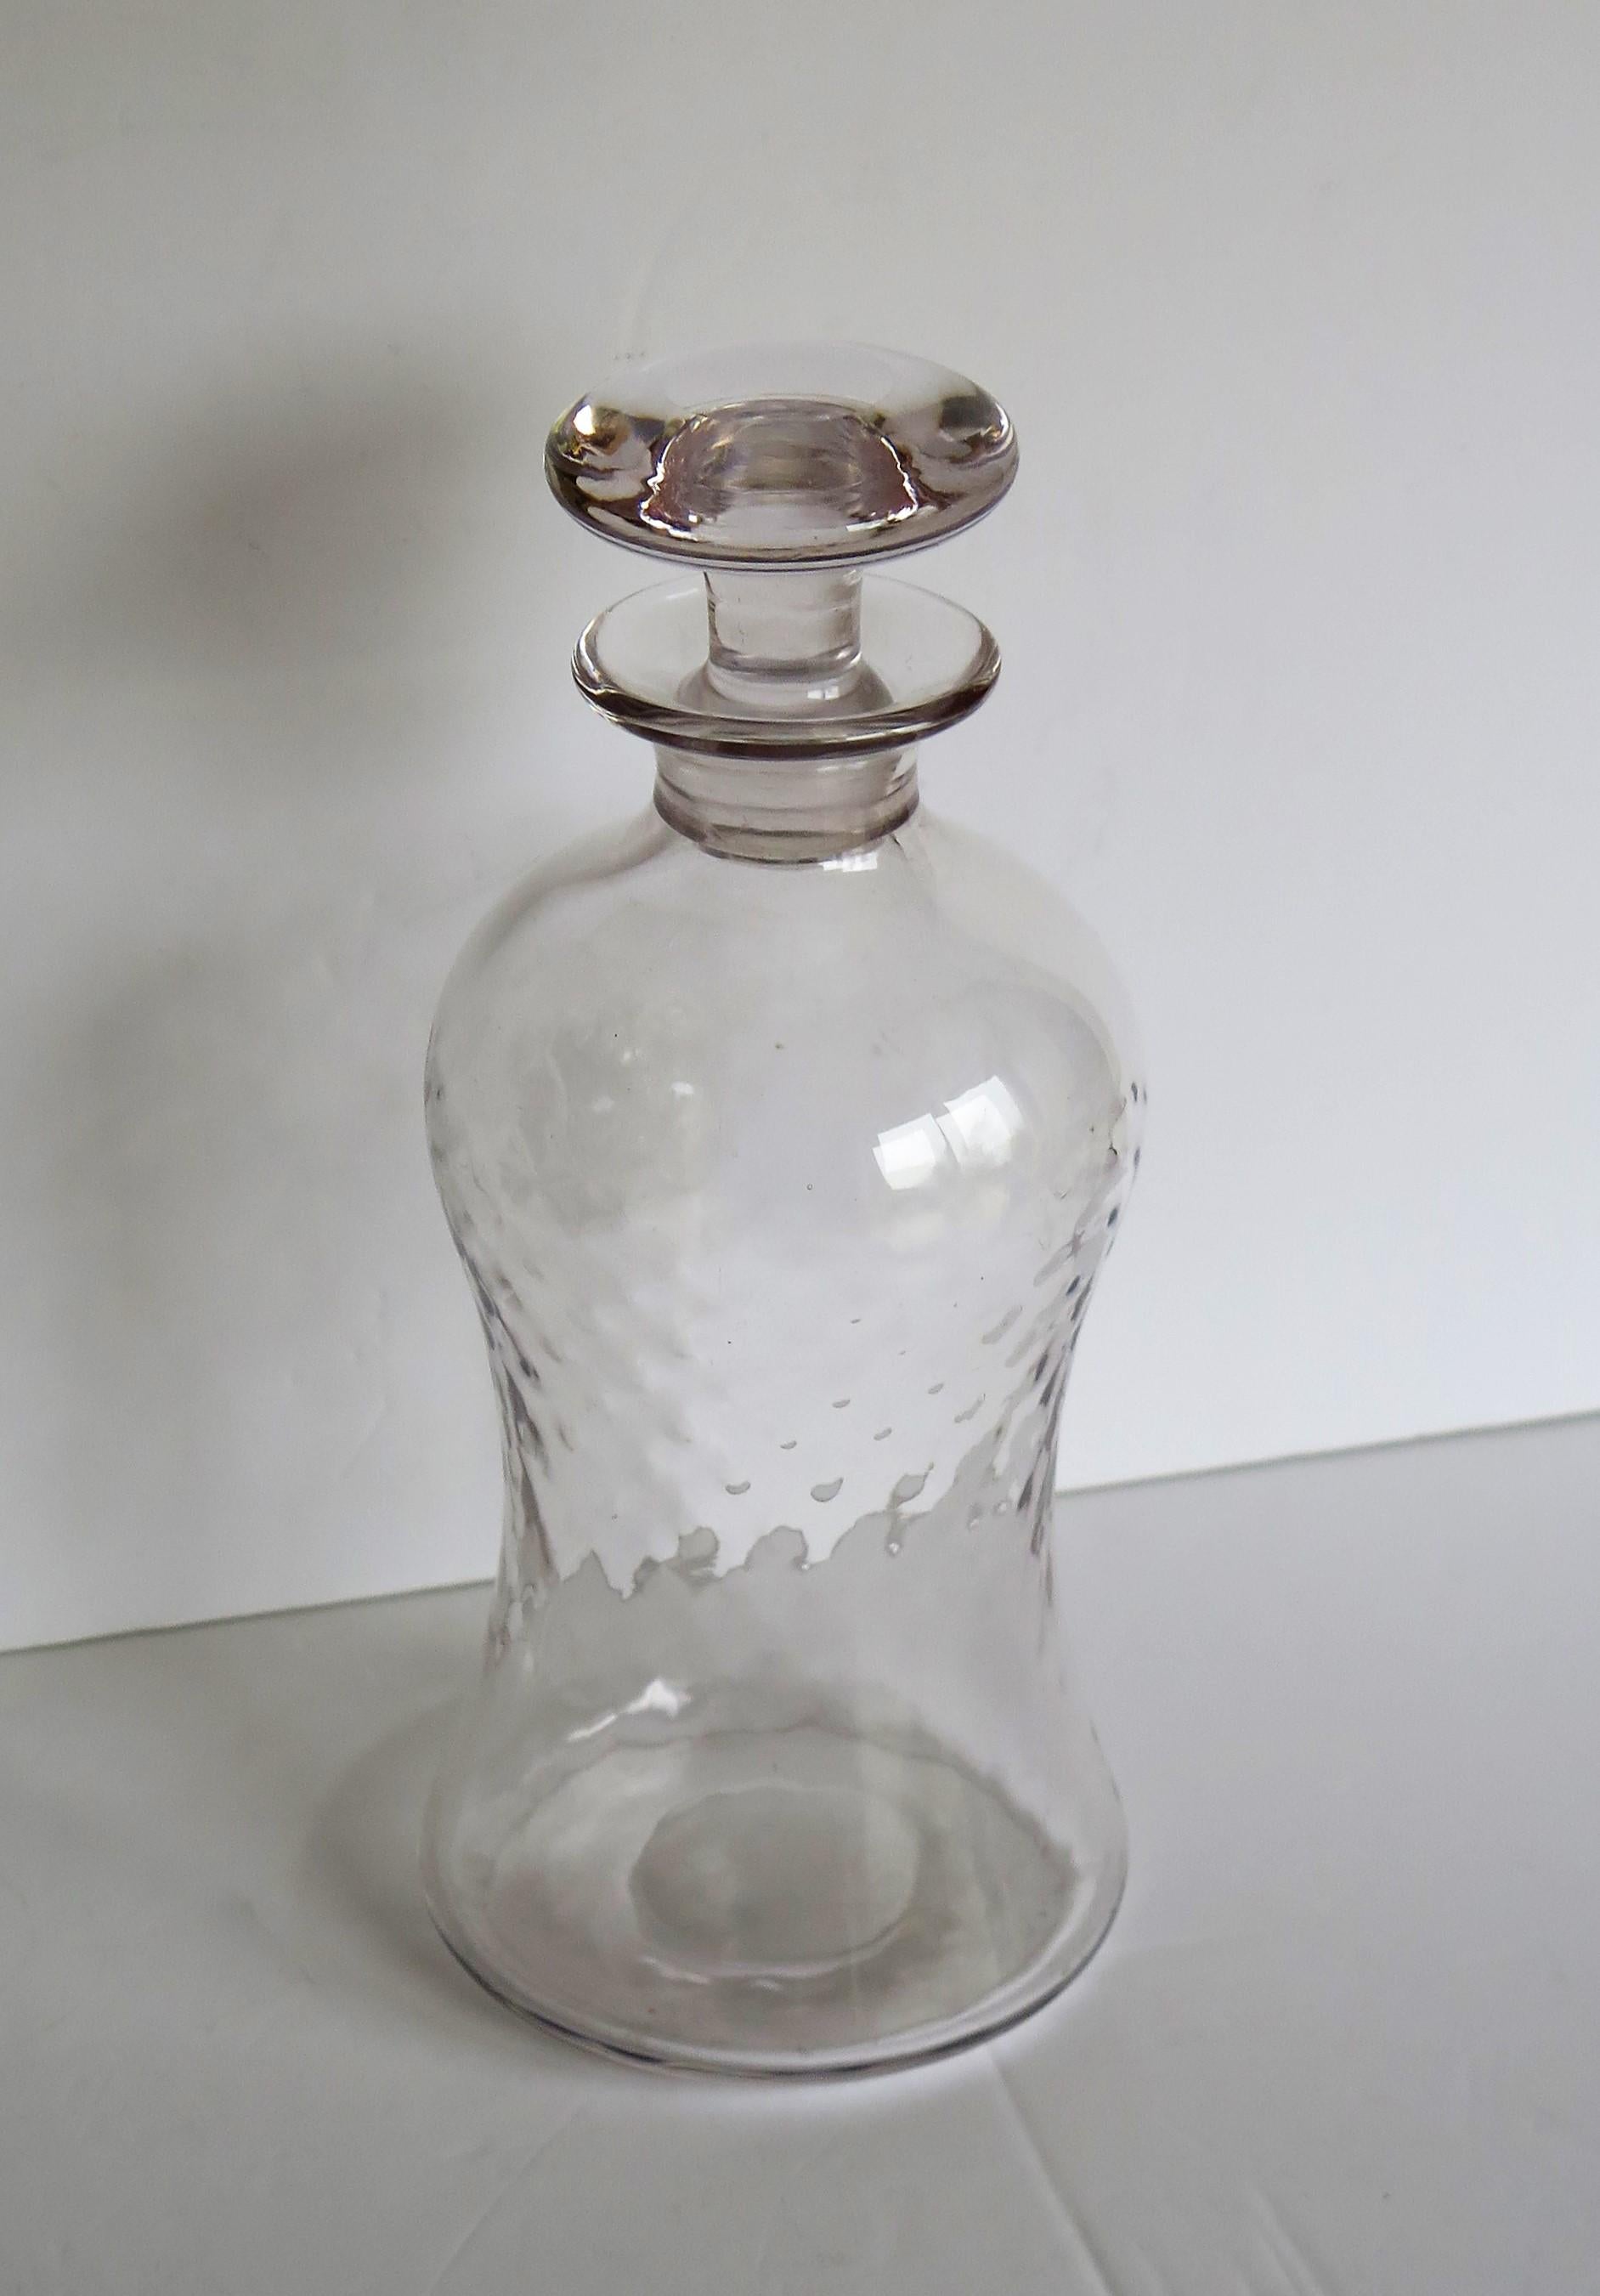 Molded Edwardian Blown Glass Decanter Dimple Moulded with Mushroom Stopper, circa 1900 For Sale